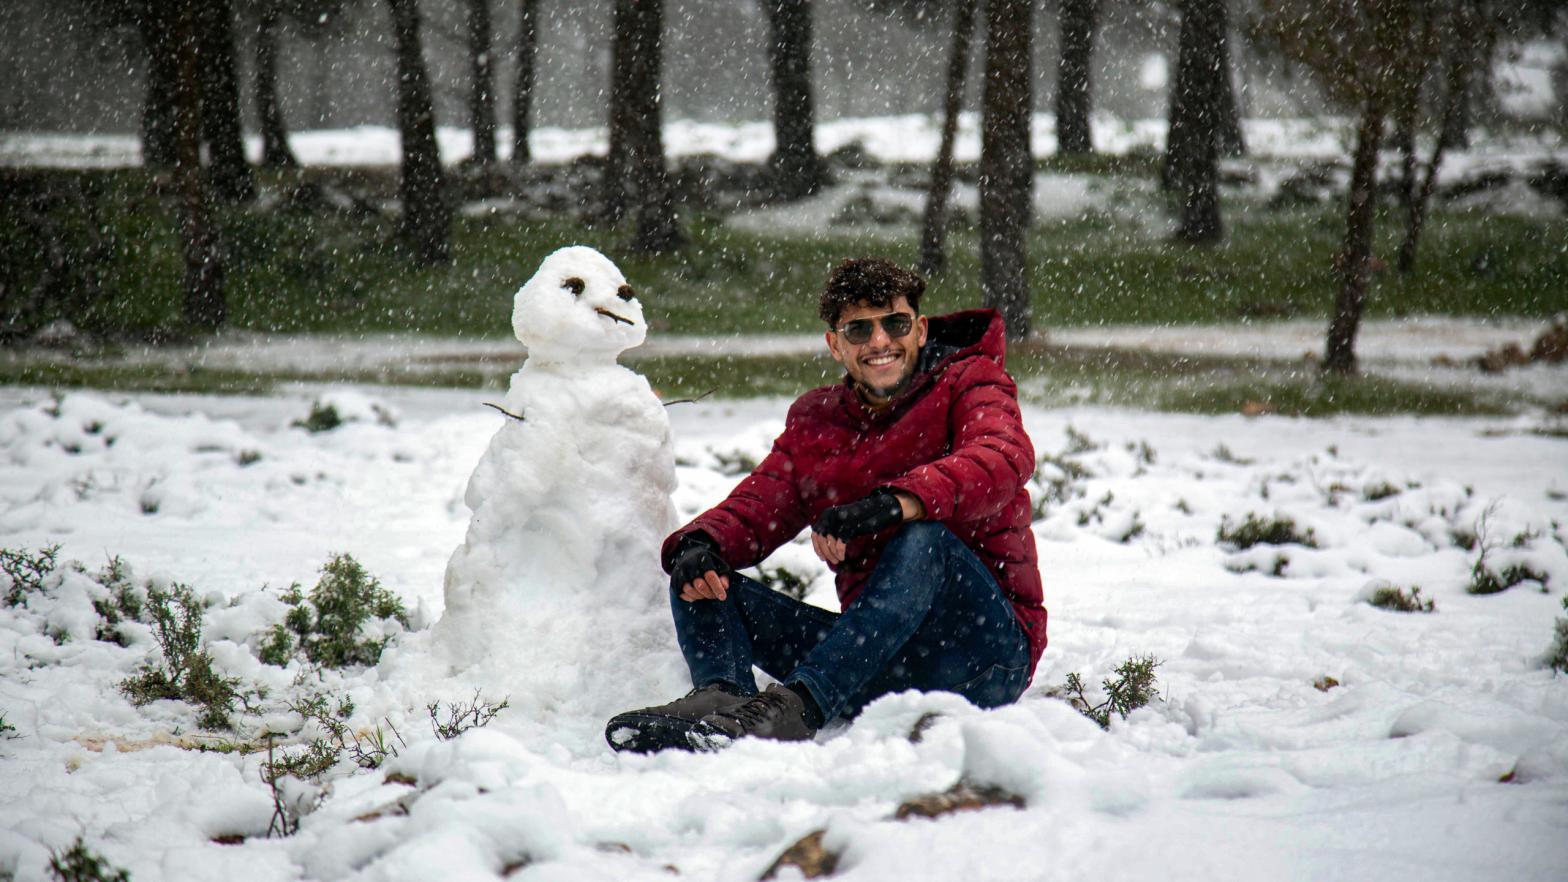 A man poses for a picture next to a snowman outside a forested area in the Sidi al-Hamri region of Libya's eastern Jebel Akhdar (Green Mountain) upland region, about 200 kilometres east of Benghazi, on February 16, 2021. (Photo: AFP via Getty Images, Getty Images)